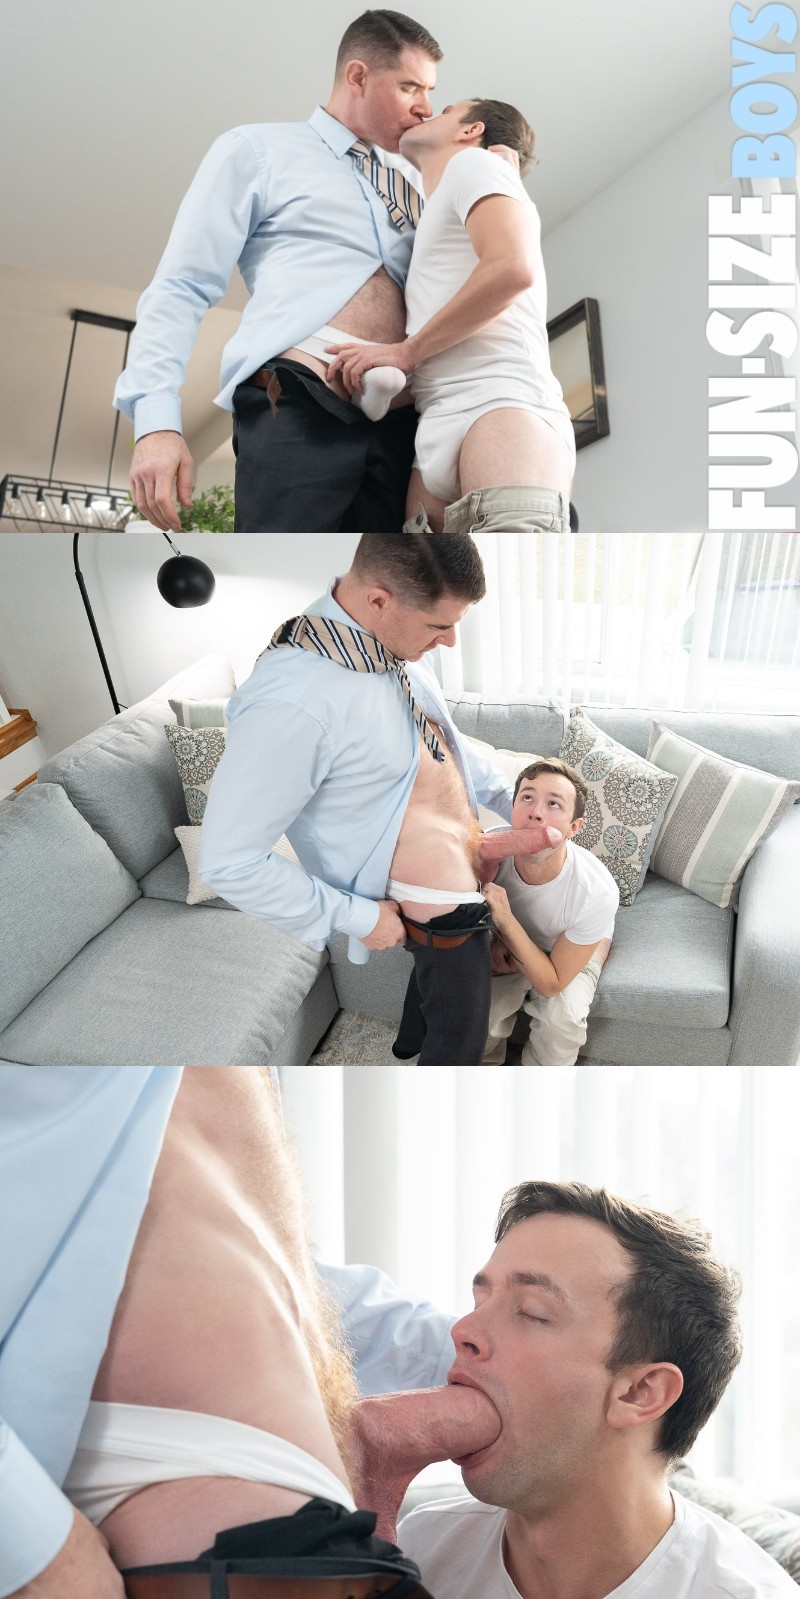 A Huge Cock Gives New Meaning to 'Daddy's Home!'